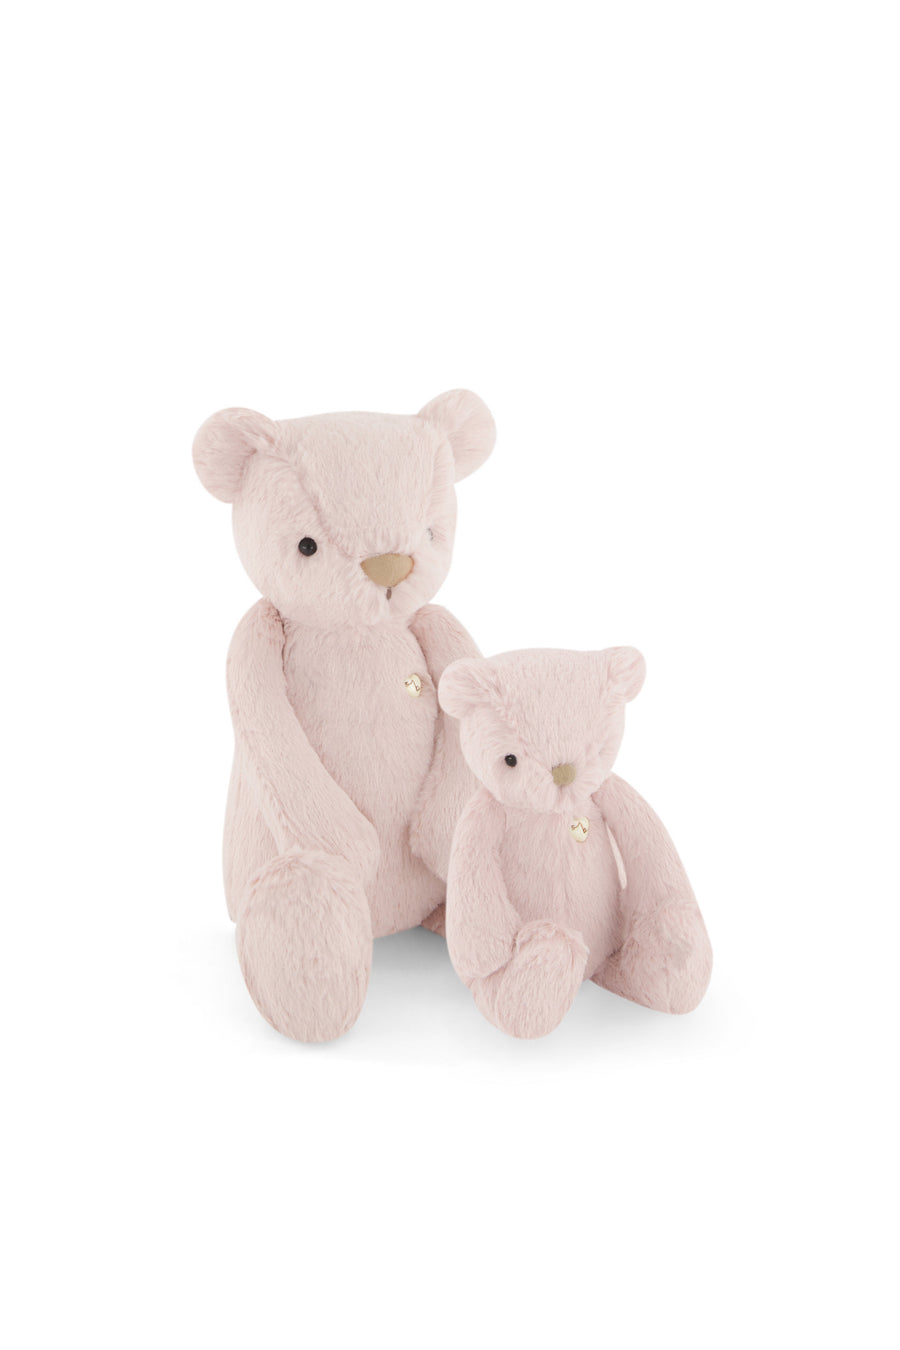 Snuggle Bunnies - George the Bear - Blush Childrens Toy from Jamie Kay USA